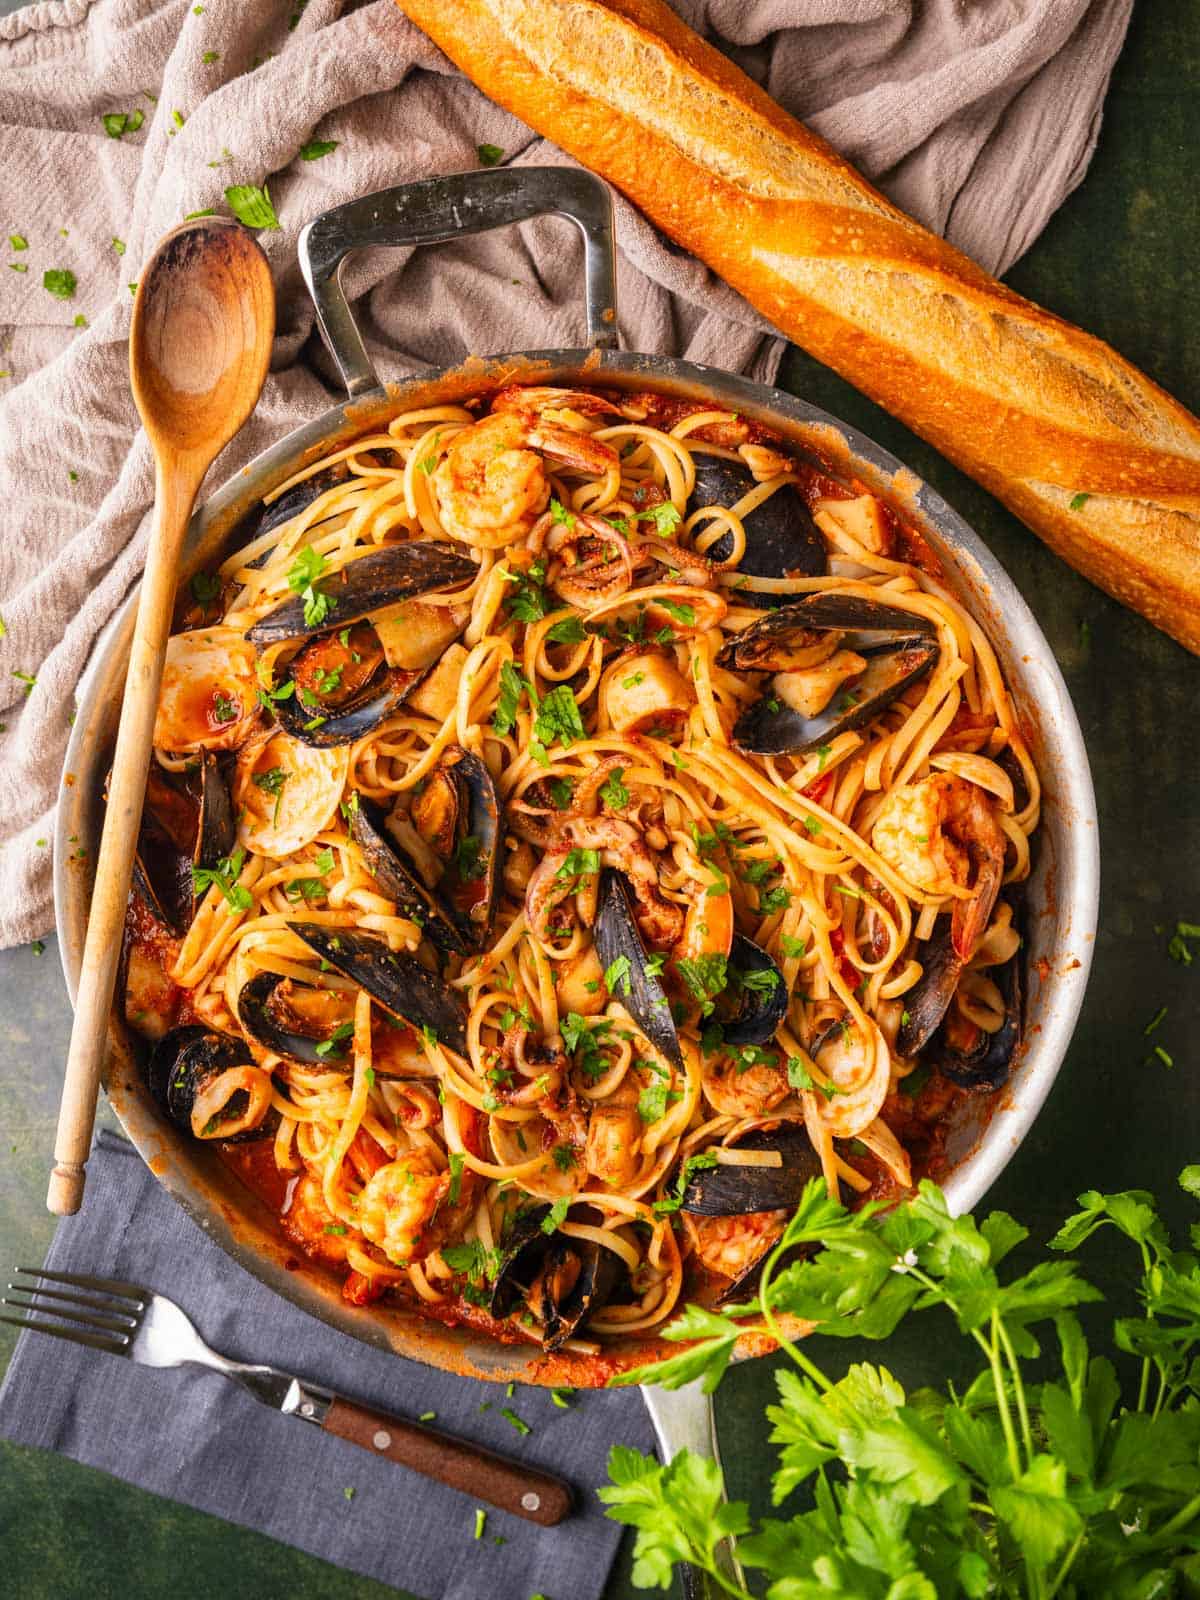 linguine with seafood in a tomato sauce in a skillet with bread next to it.